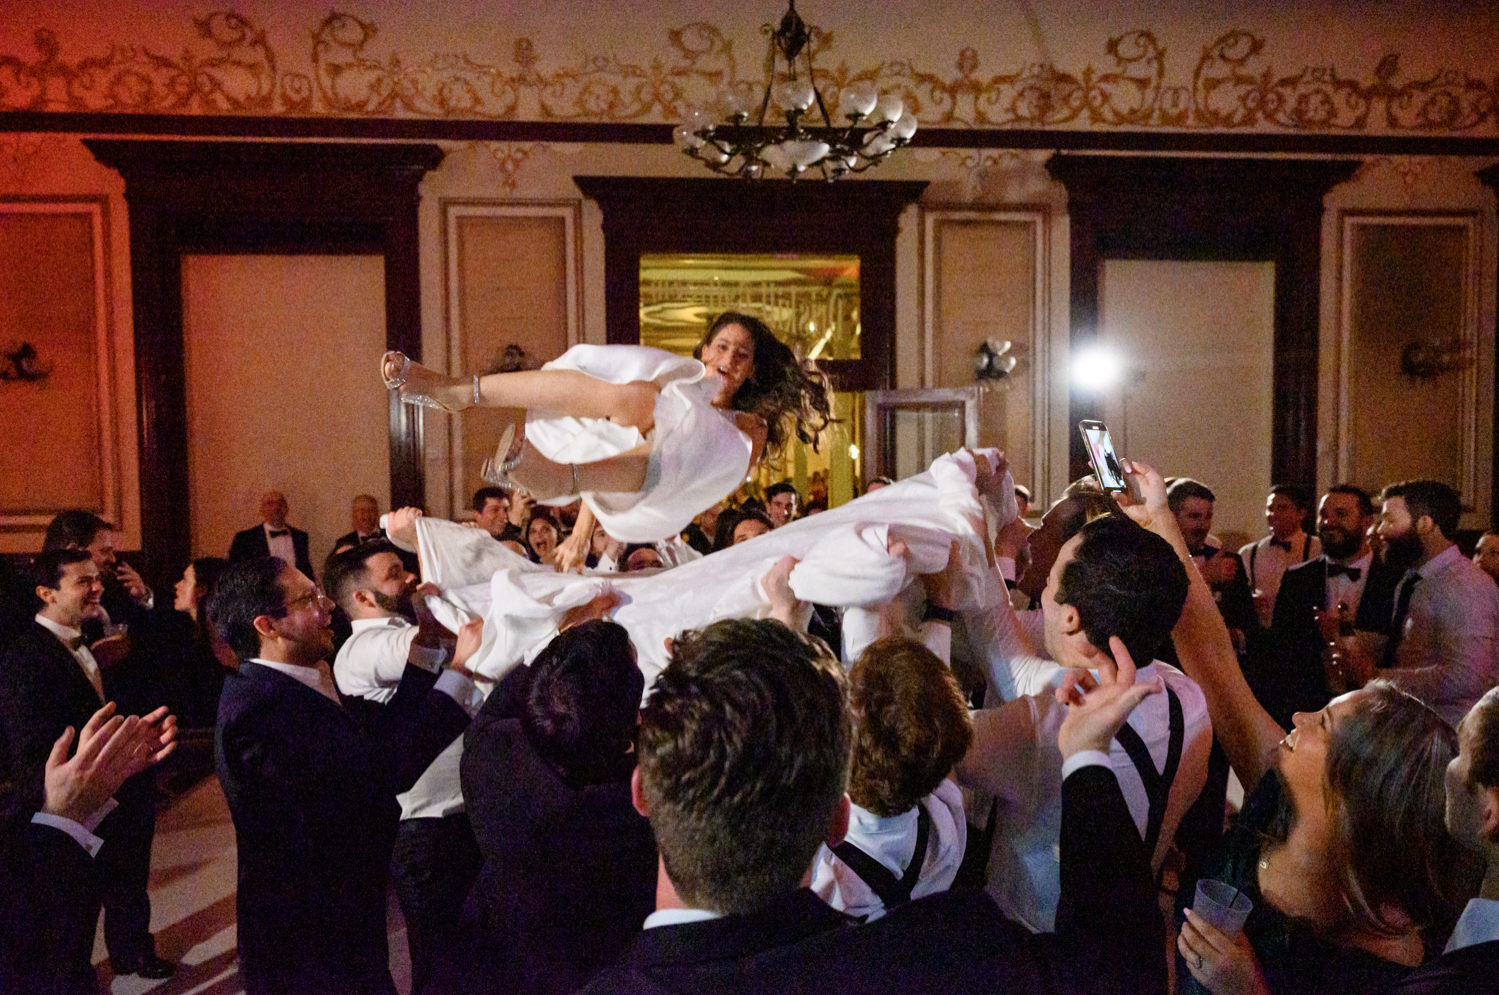 The guests grab a sheet and throw the bride into the air.